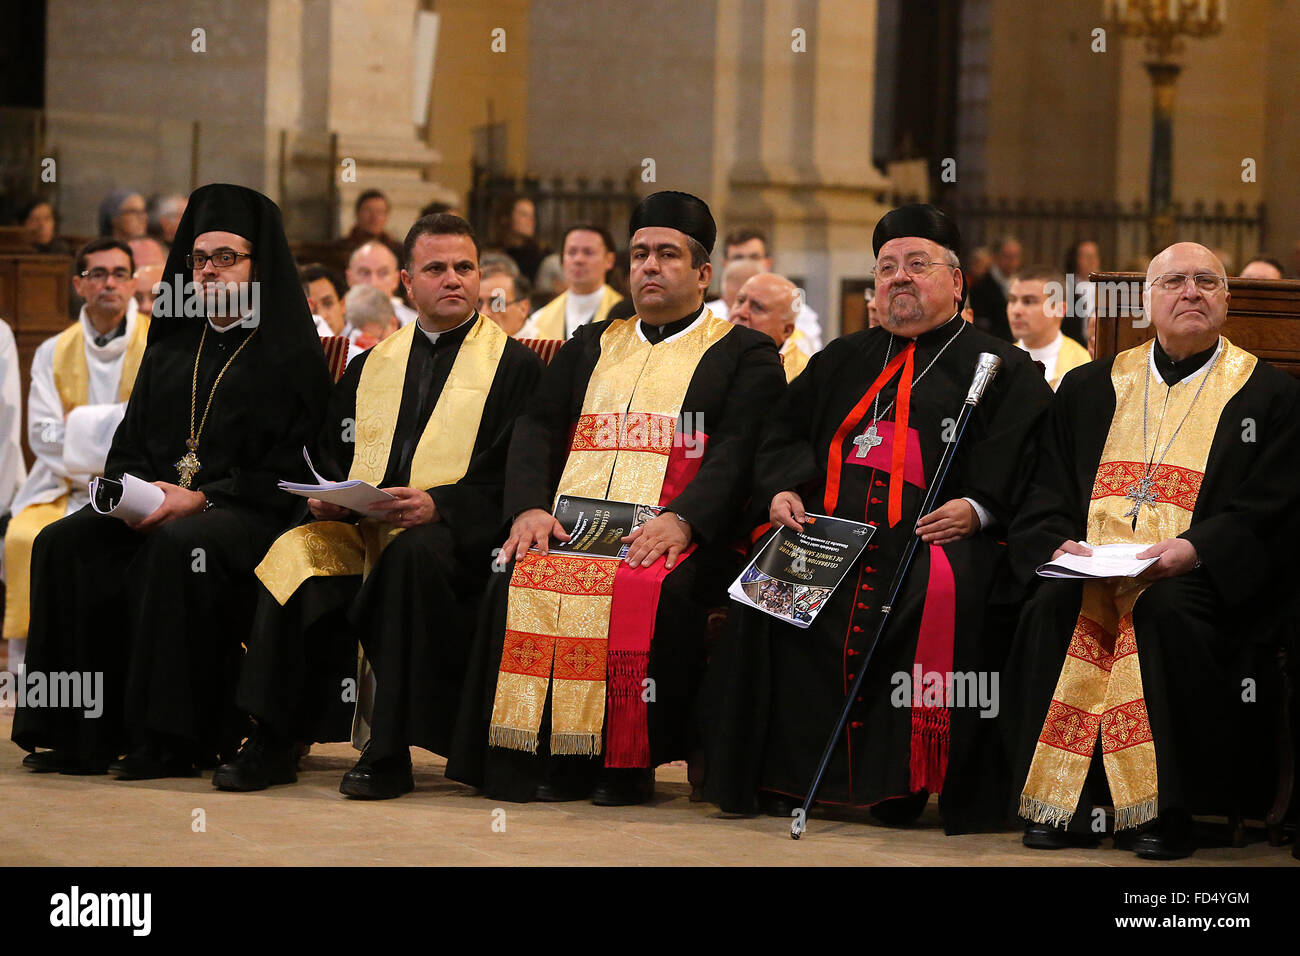 Middle Eastern christian clergy. Stock Photo